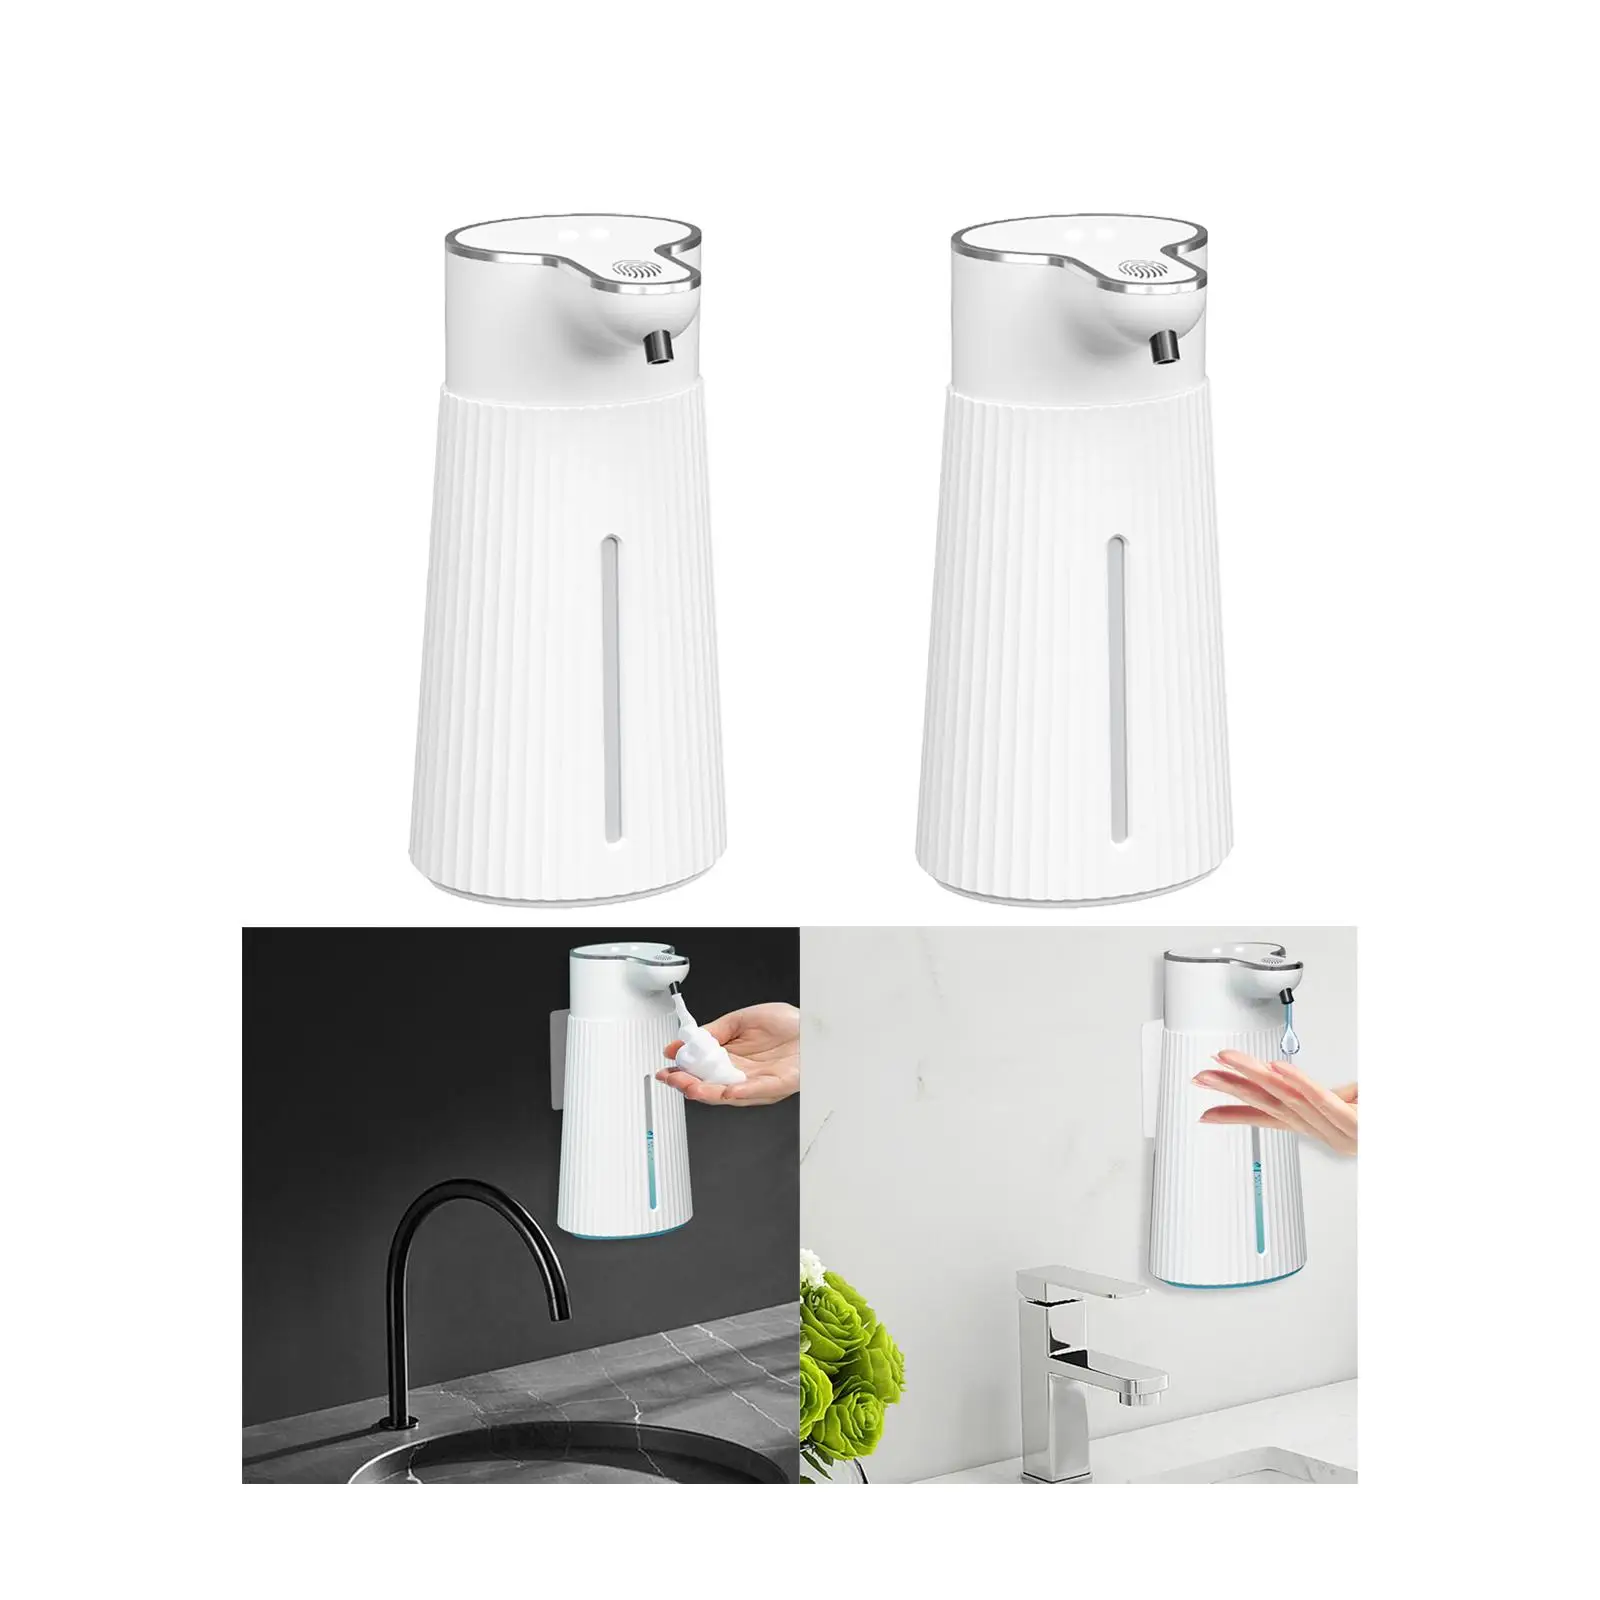 Automatic Liquid Soap Dispenser 13.5oz IPX6 Waterproof Touch Frees Soap Dispensers for Kitchen Commercial Restoom Hotel Bathroom